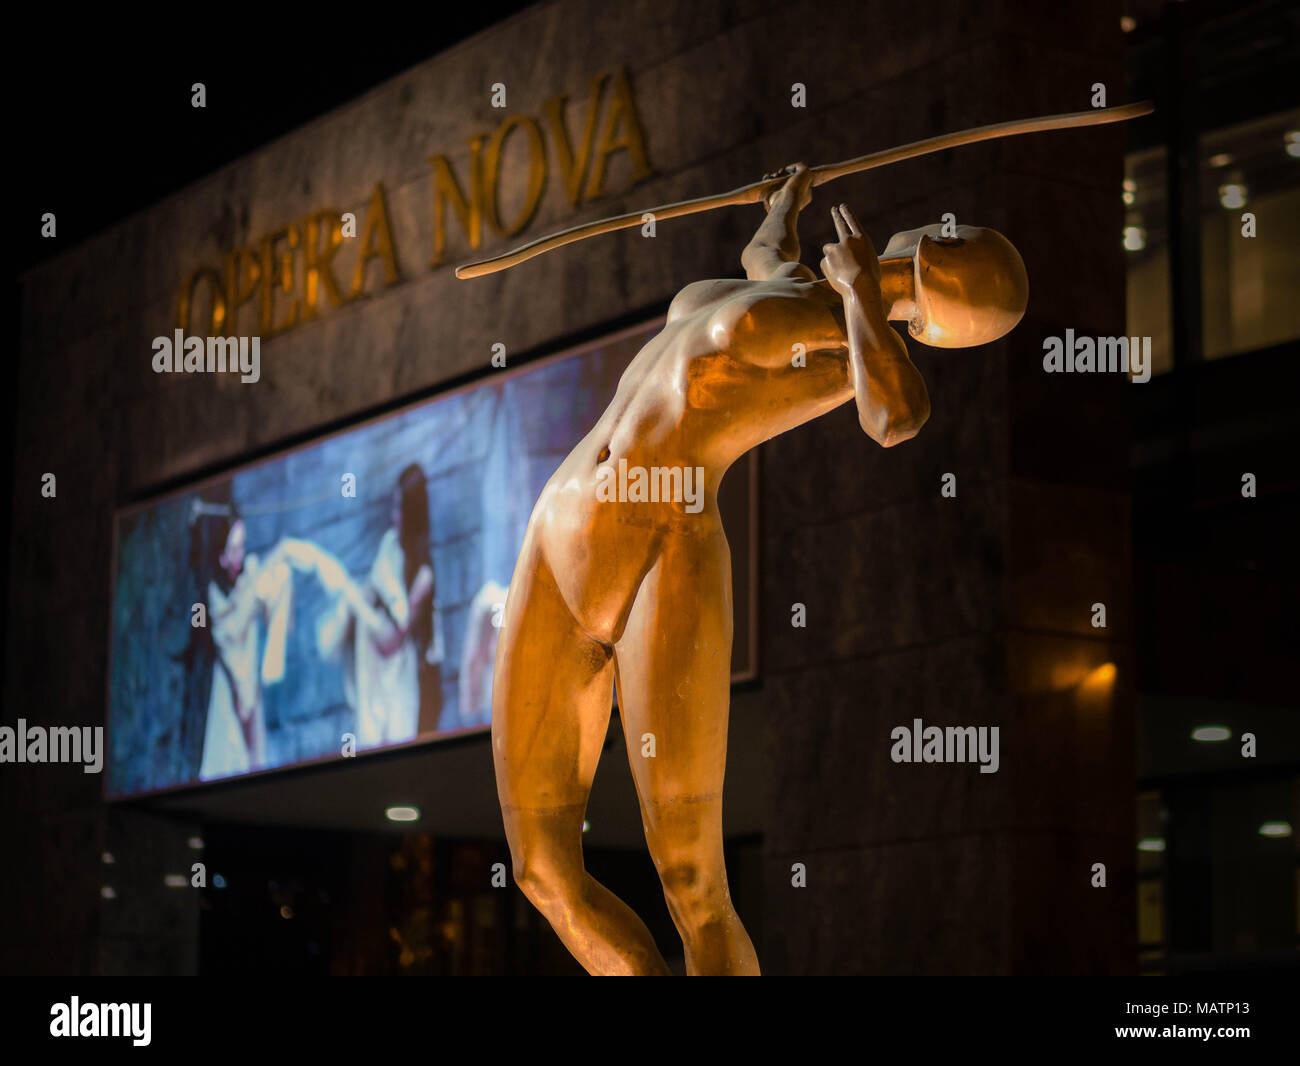 Sculpture 'New Archer' in front of the opera 'Opera Nova' at night in Bydgoszcz, Poland Stock Photo